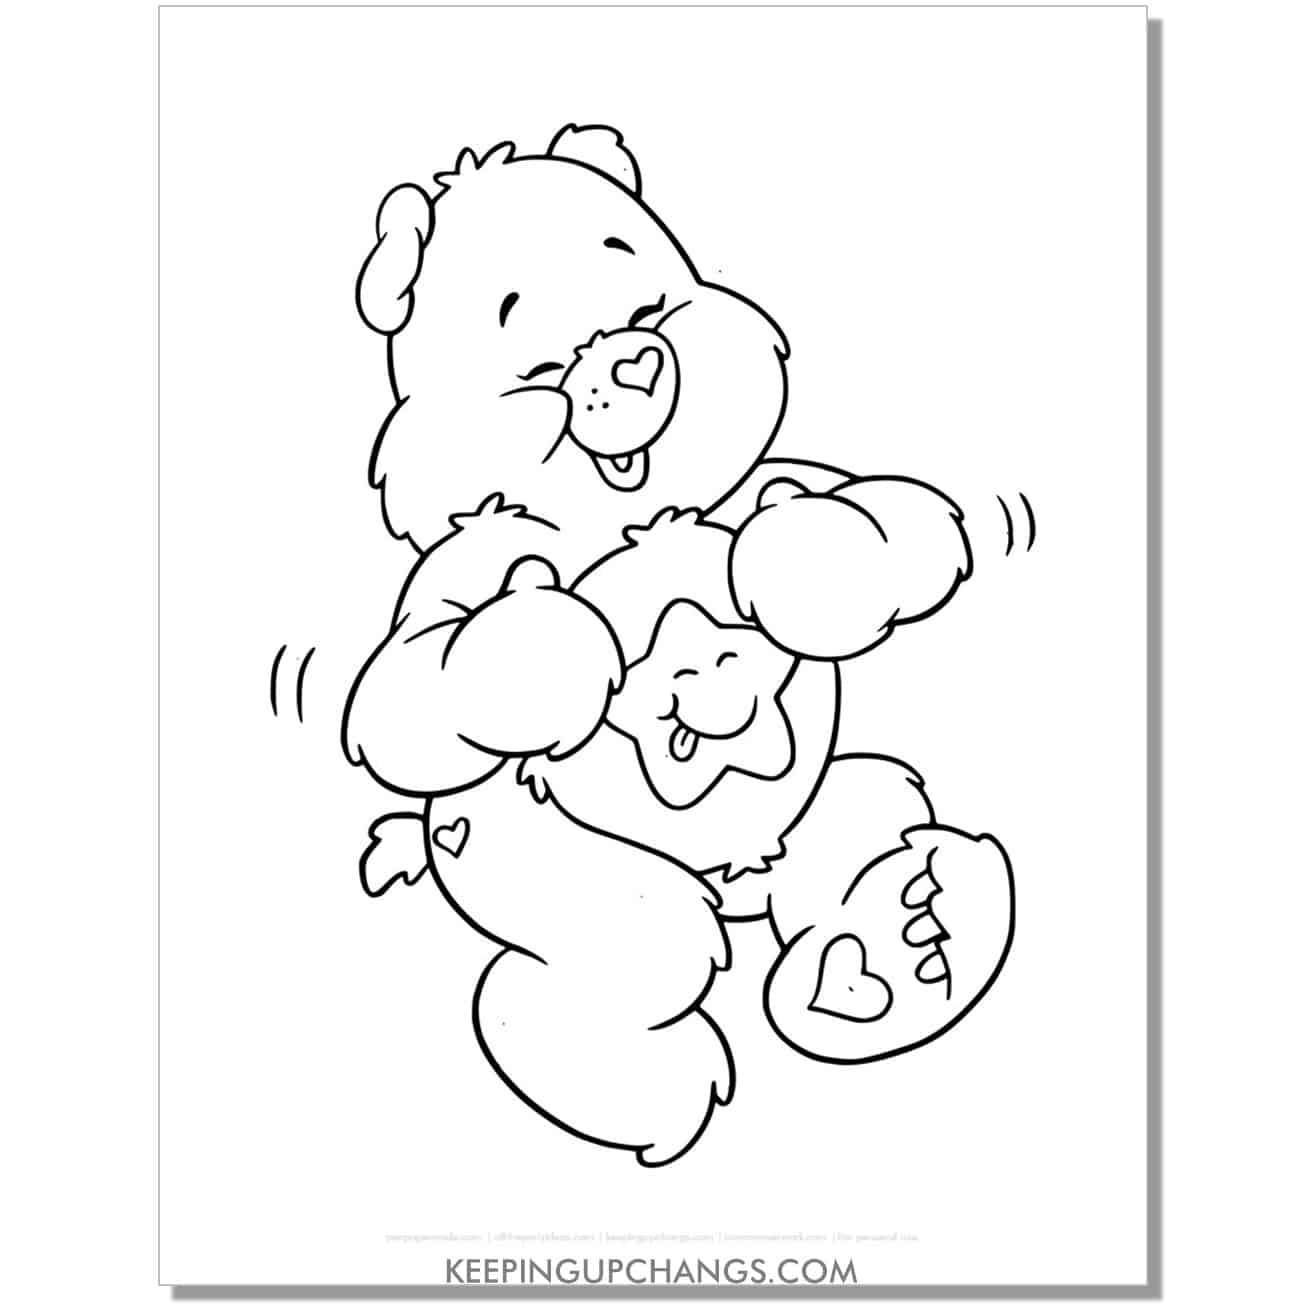 laugh a lot bear laughing care bear coloring page, sheet.